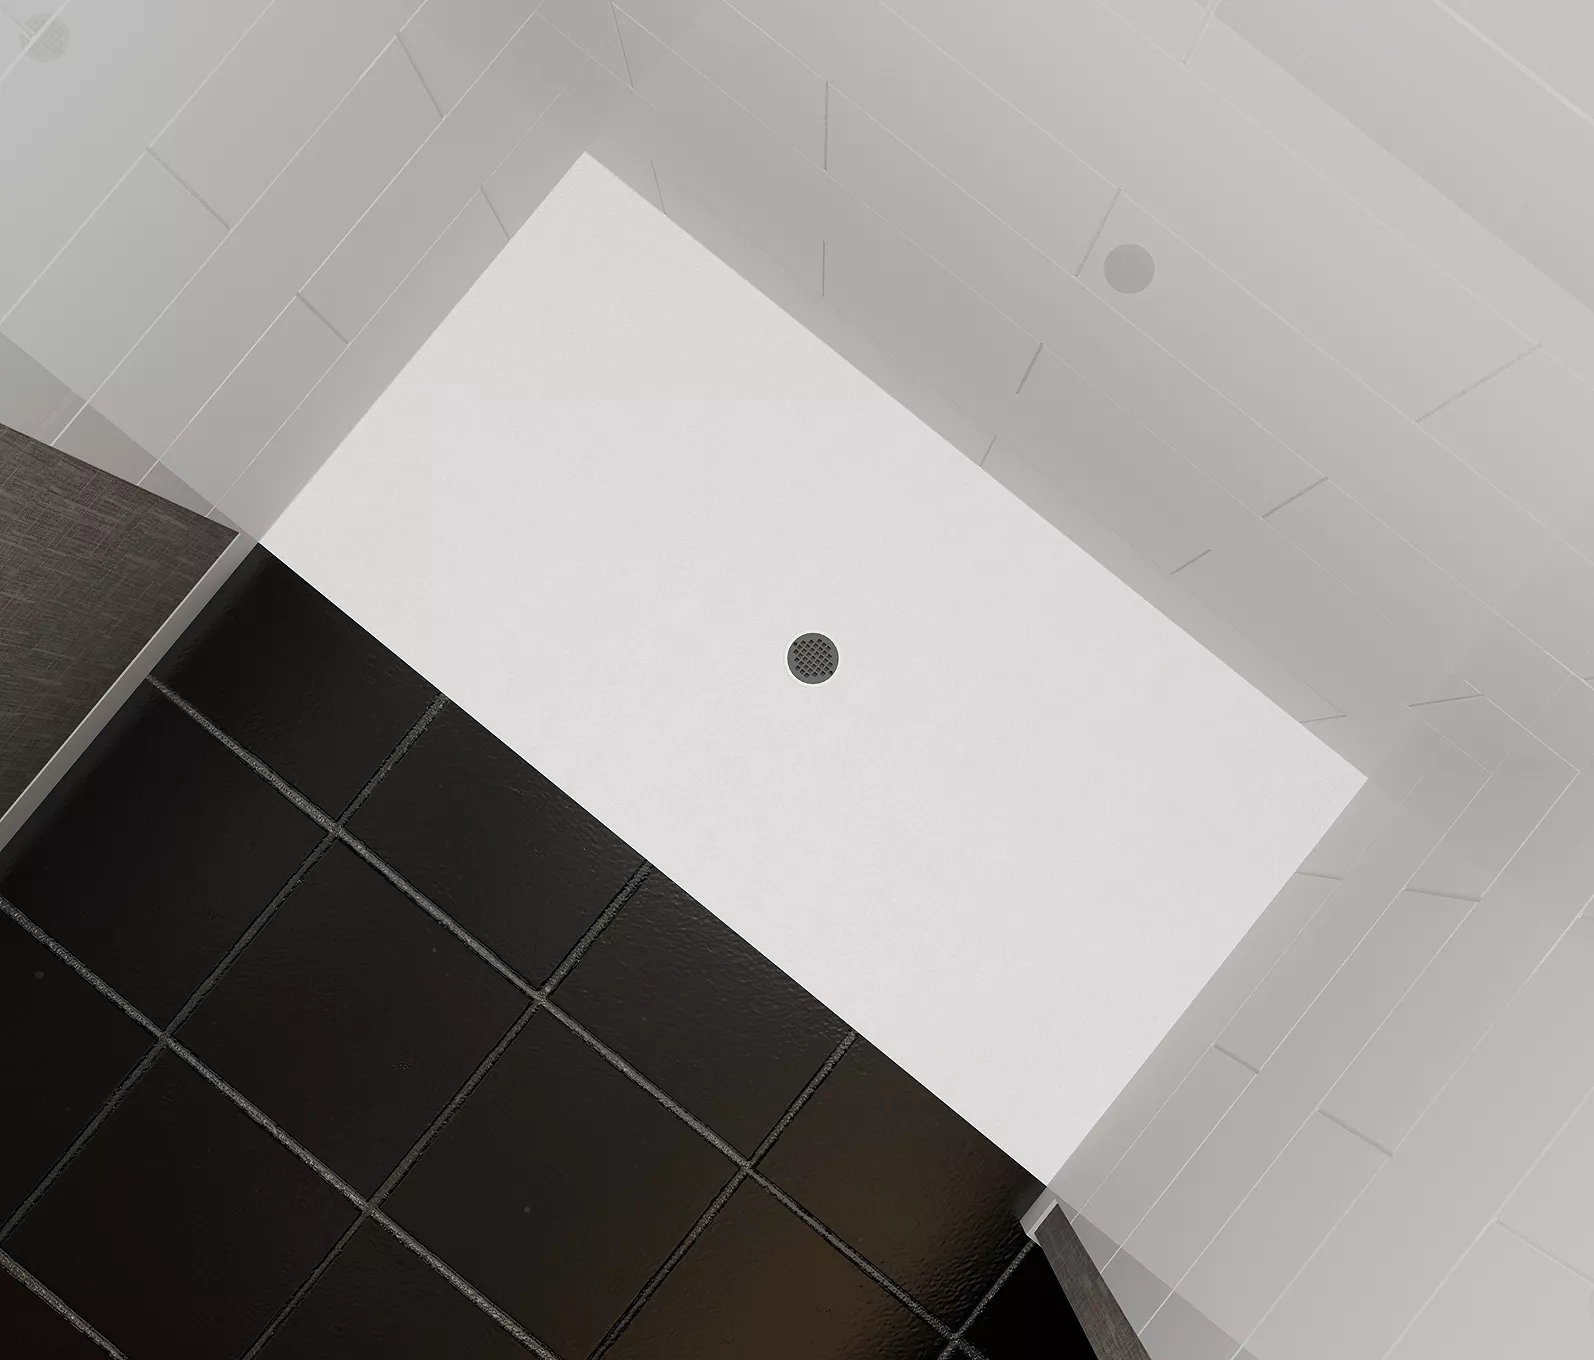 https://minceymarble.com/uploads/products/shower-pans/standard-rectangle/detail-image/ri-3162-c-sf-roll-in-pan-topviewangled.jpg